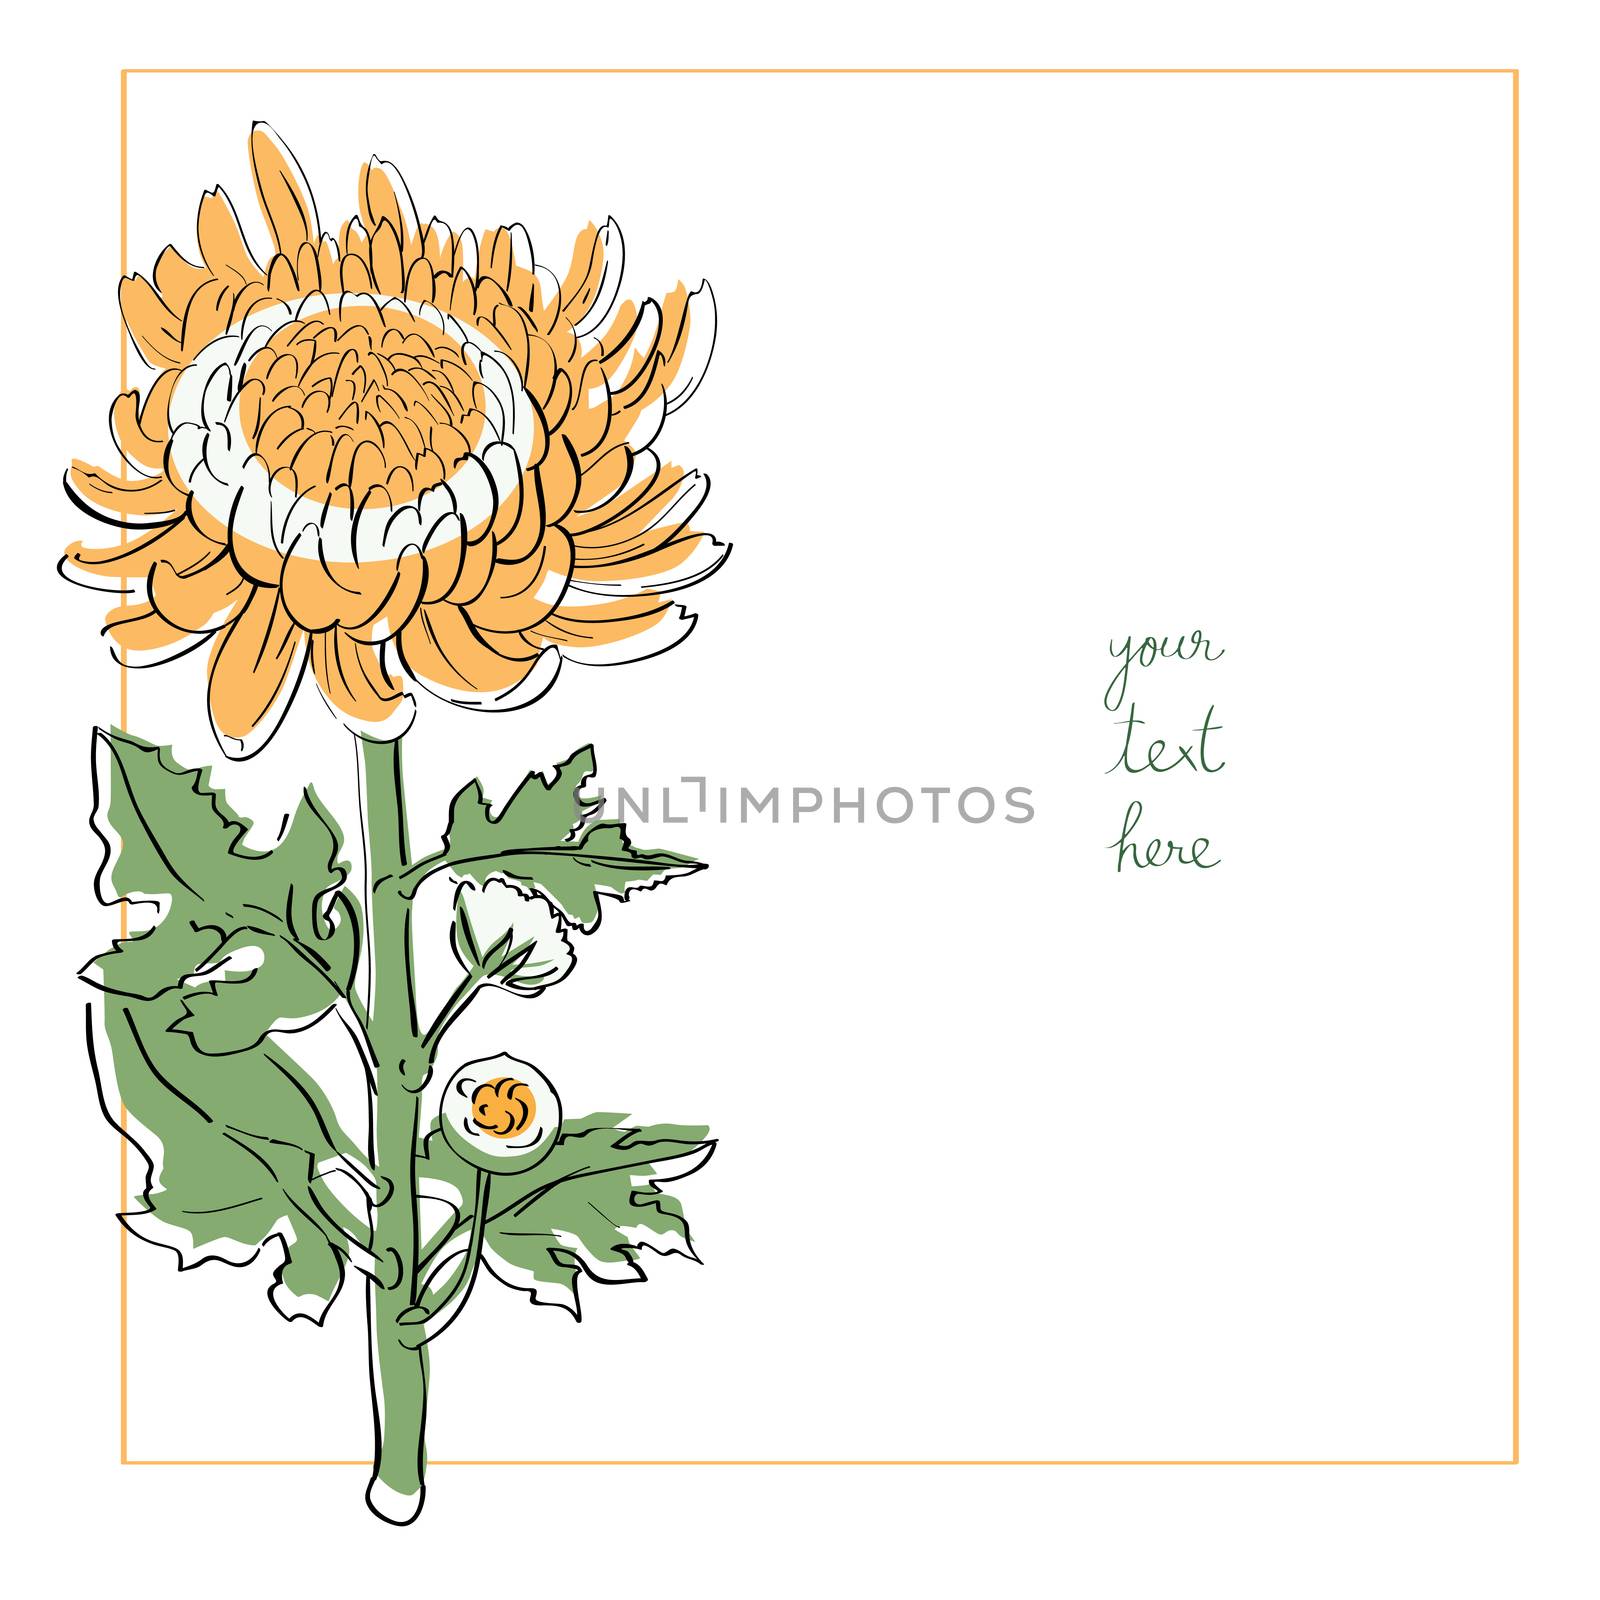 Chrysanthemum minimal card illustration, one element composition with simple frame over white